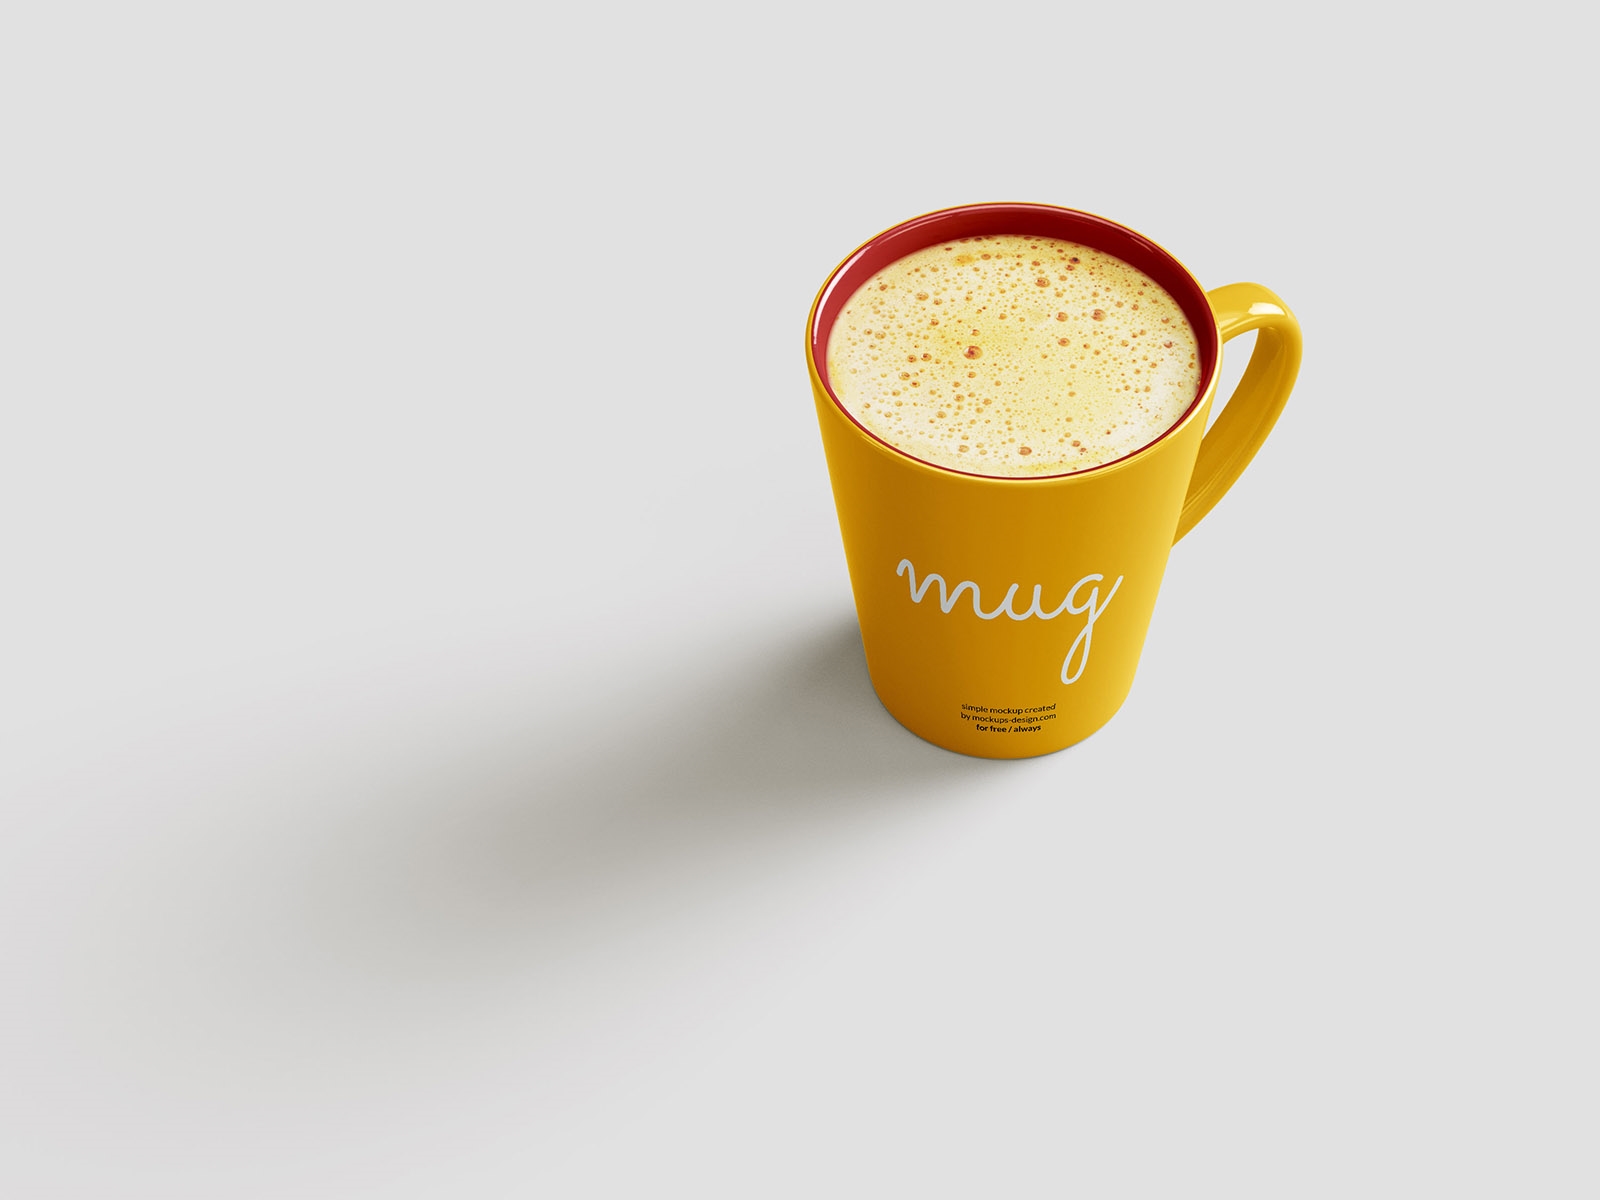 5 Mockups of Tapered Mug from Different Angles FREE PSD